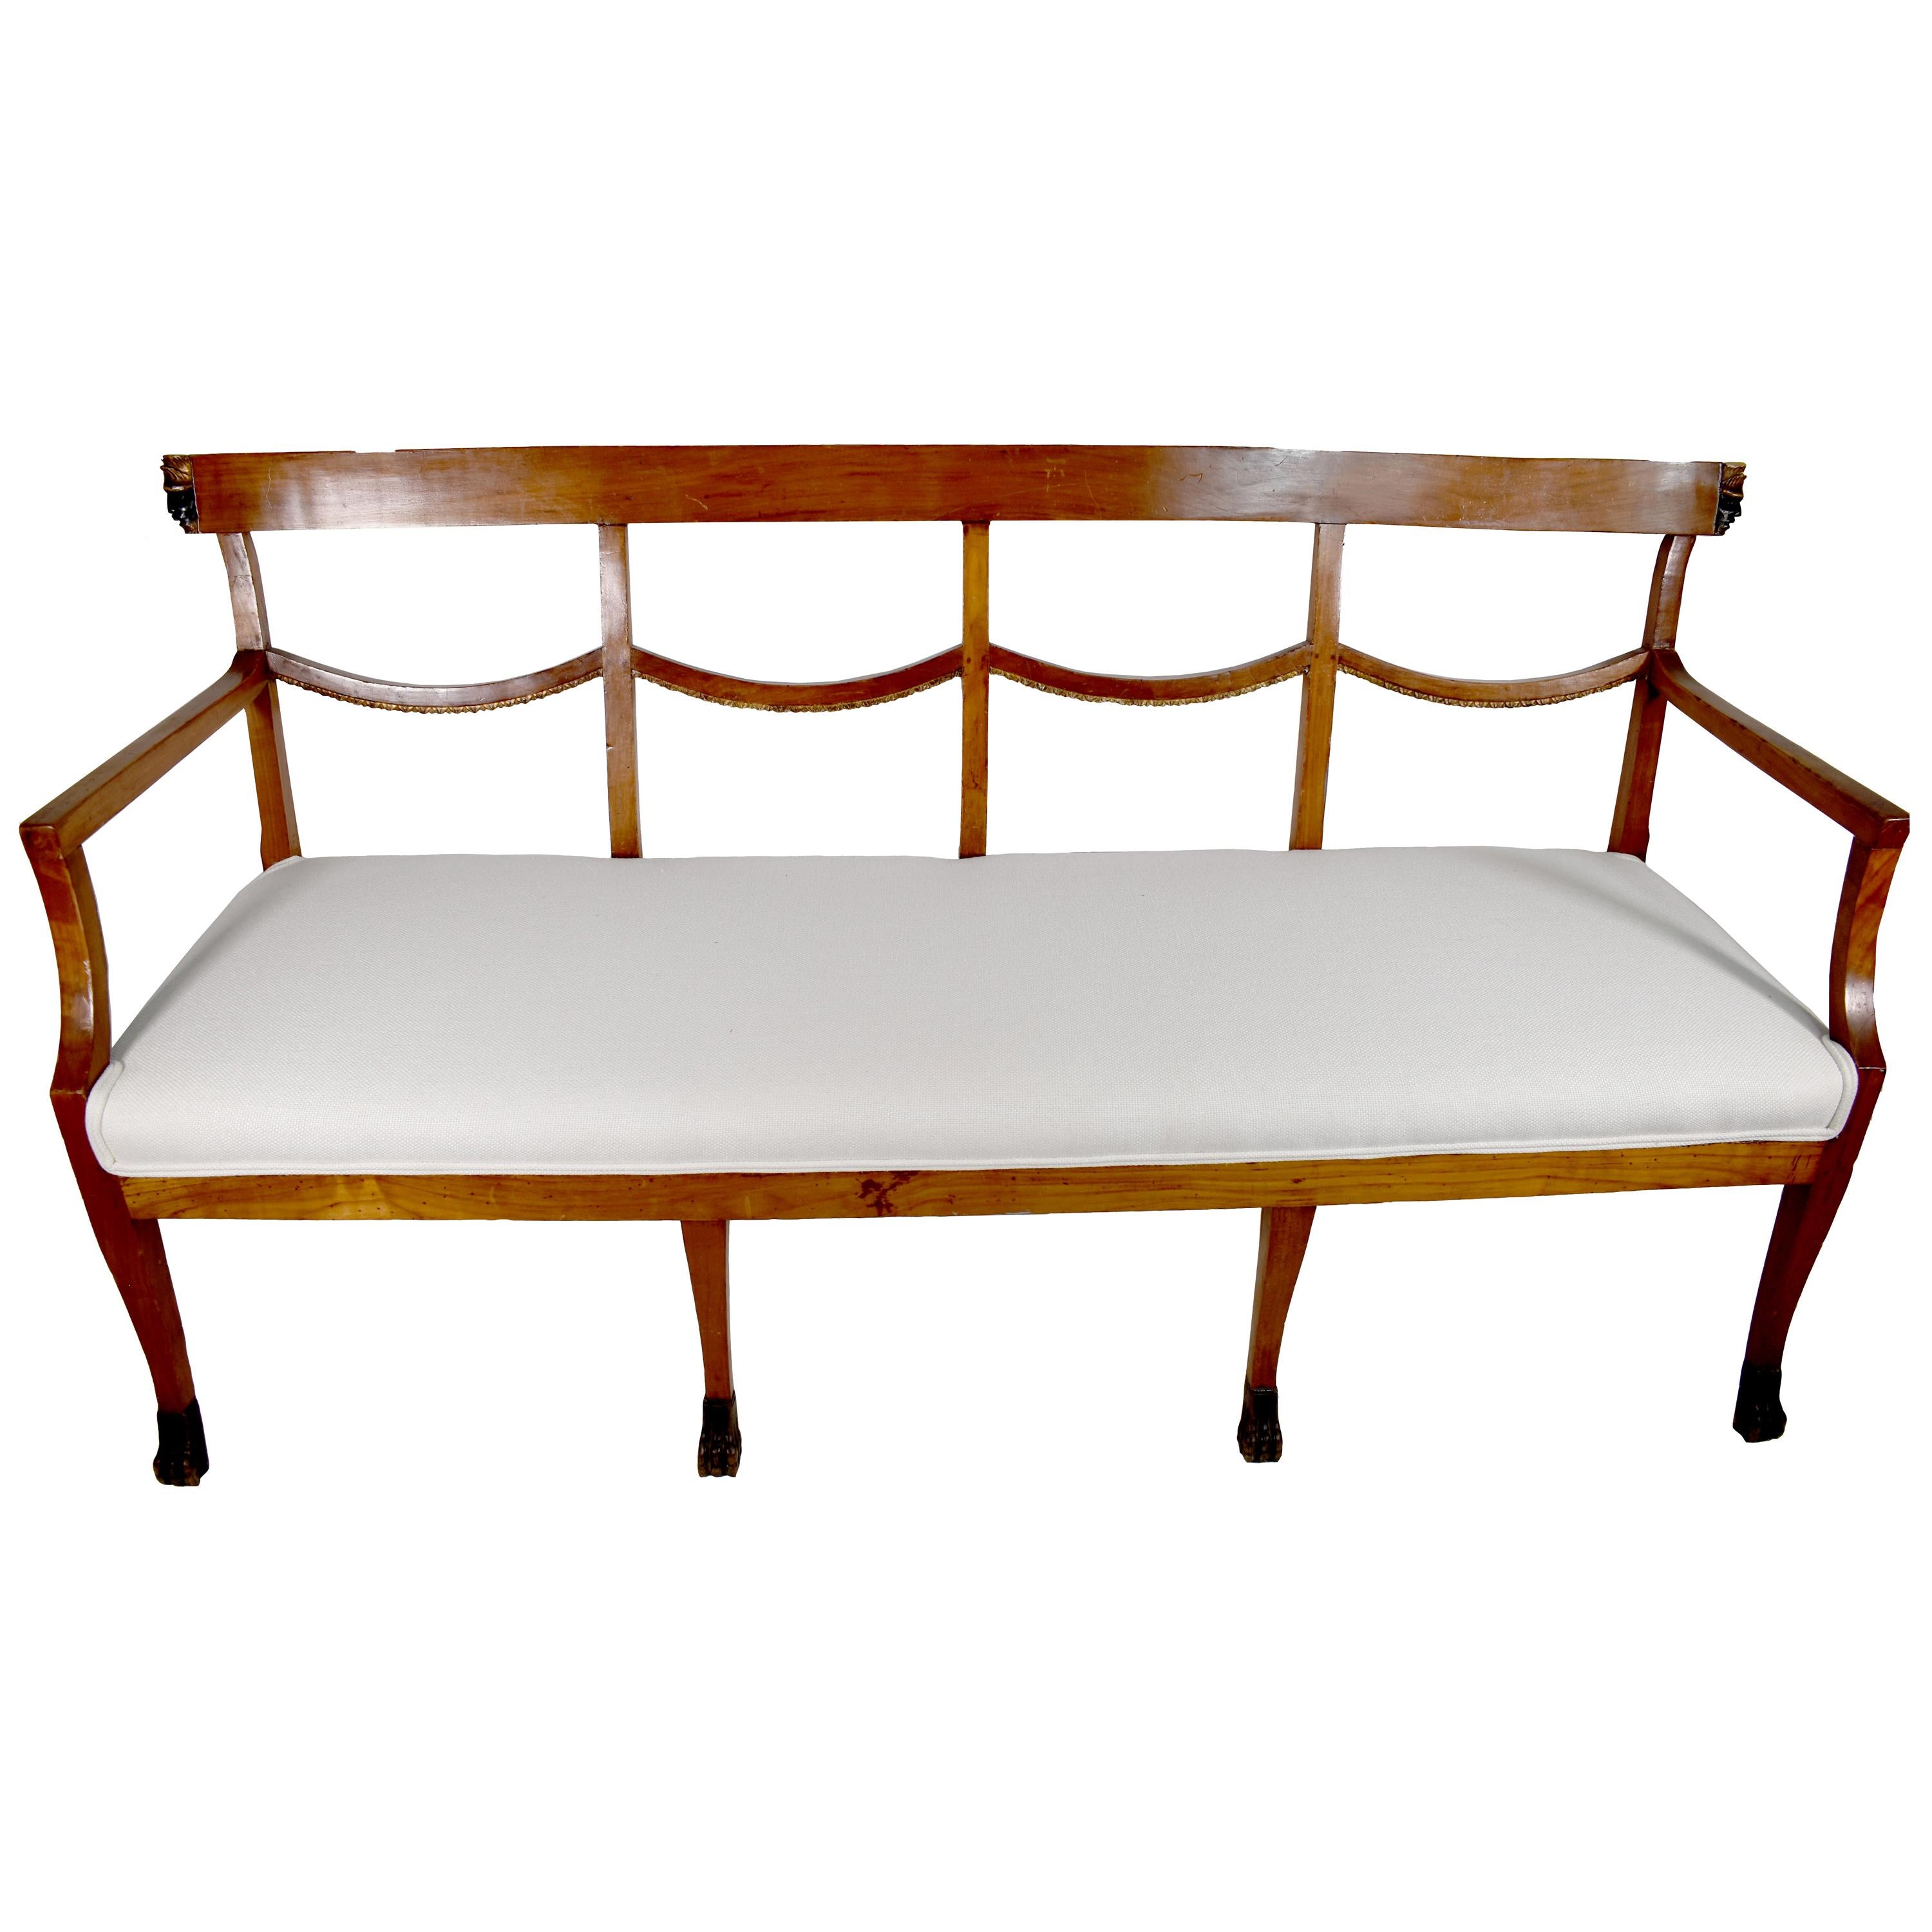 19th Century Empire Settee or Bench